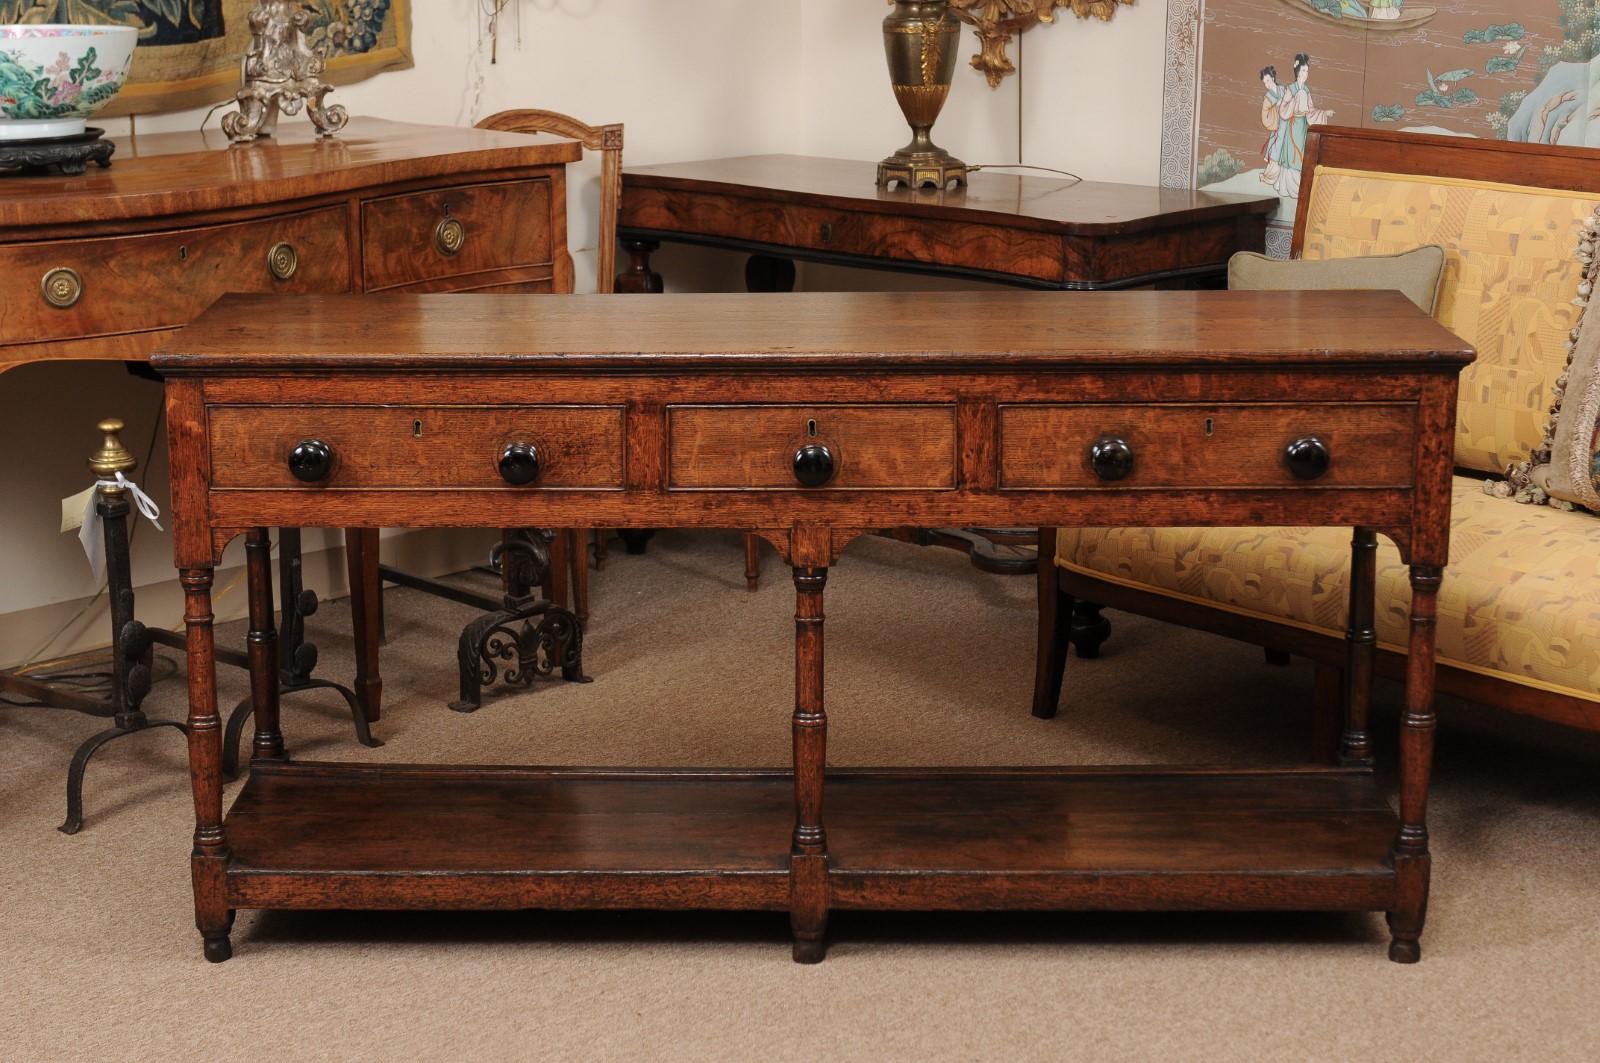 An early 19th century English oak dresser base featuring 3 drawers with round wooden pulls, turned legs joined by lower plinth ending in rounded feet. 

 